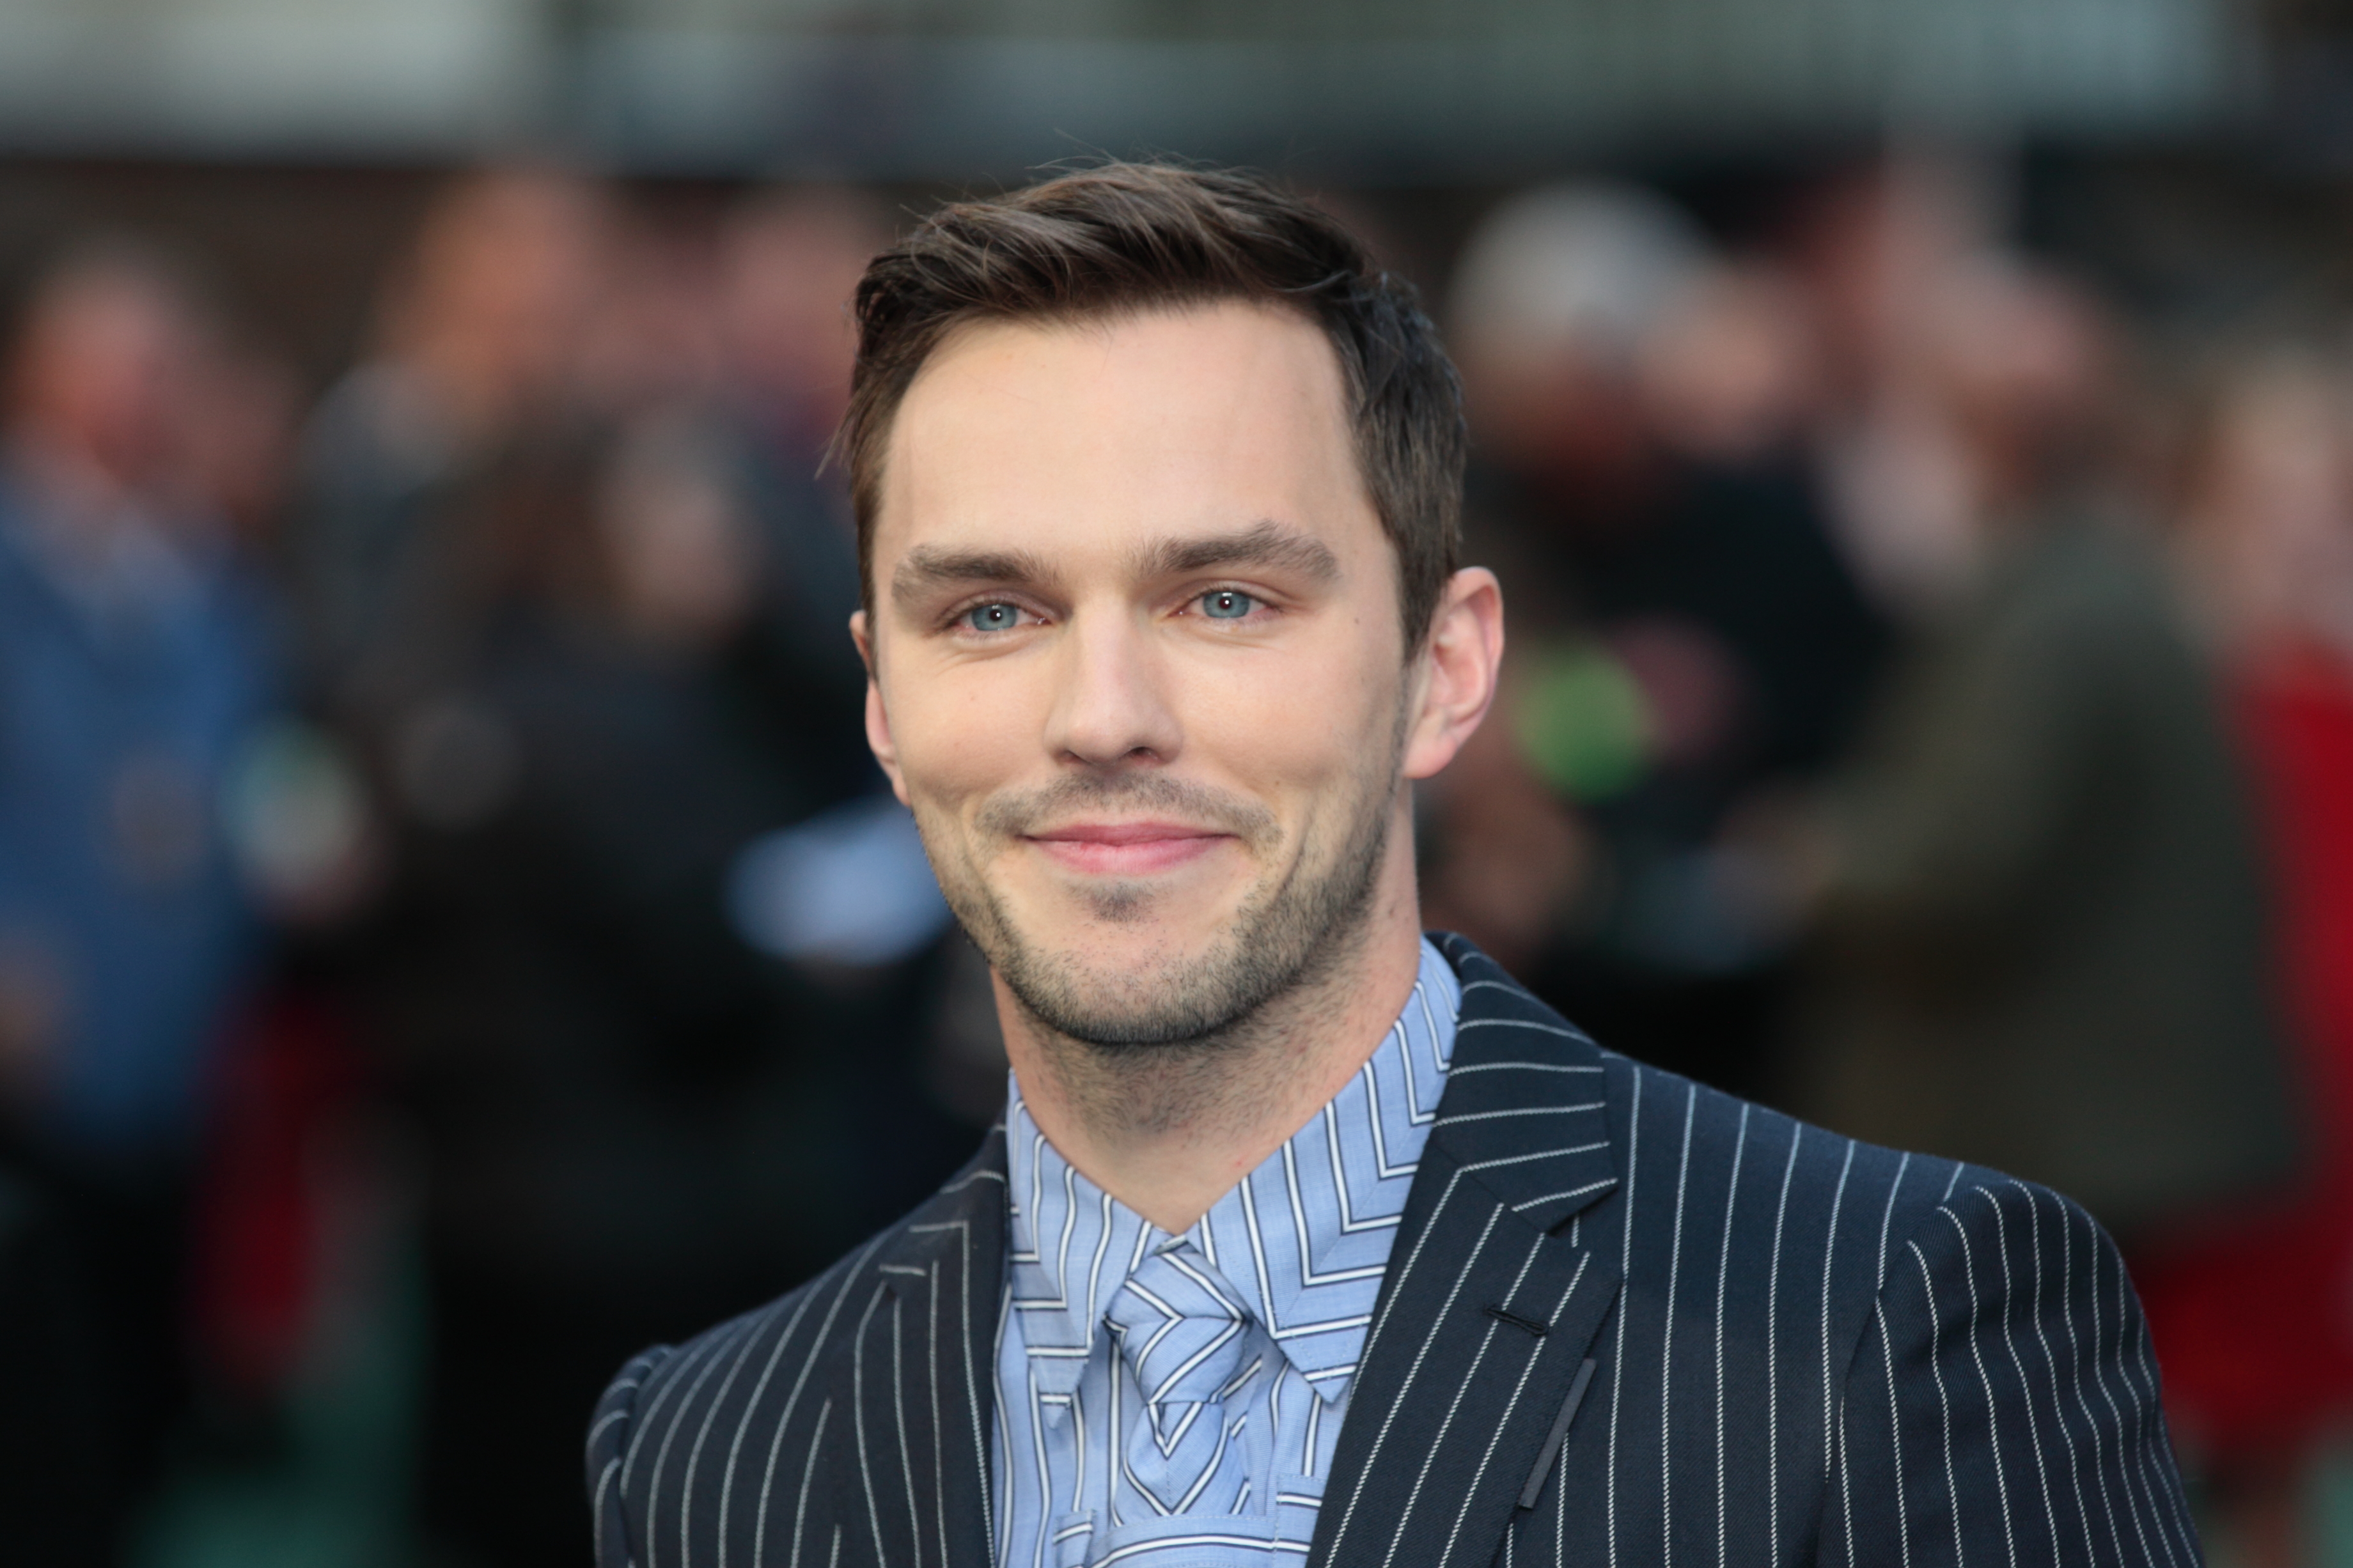 British Babe Nicholas Hoult Tells Us The Greatest Film Script He’s Ever Read